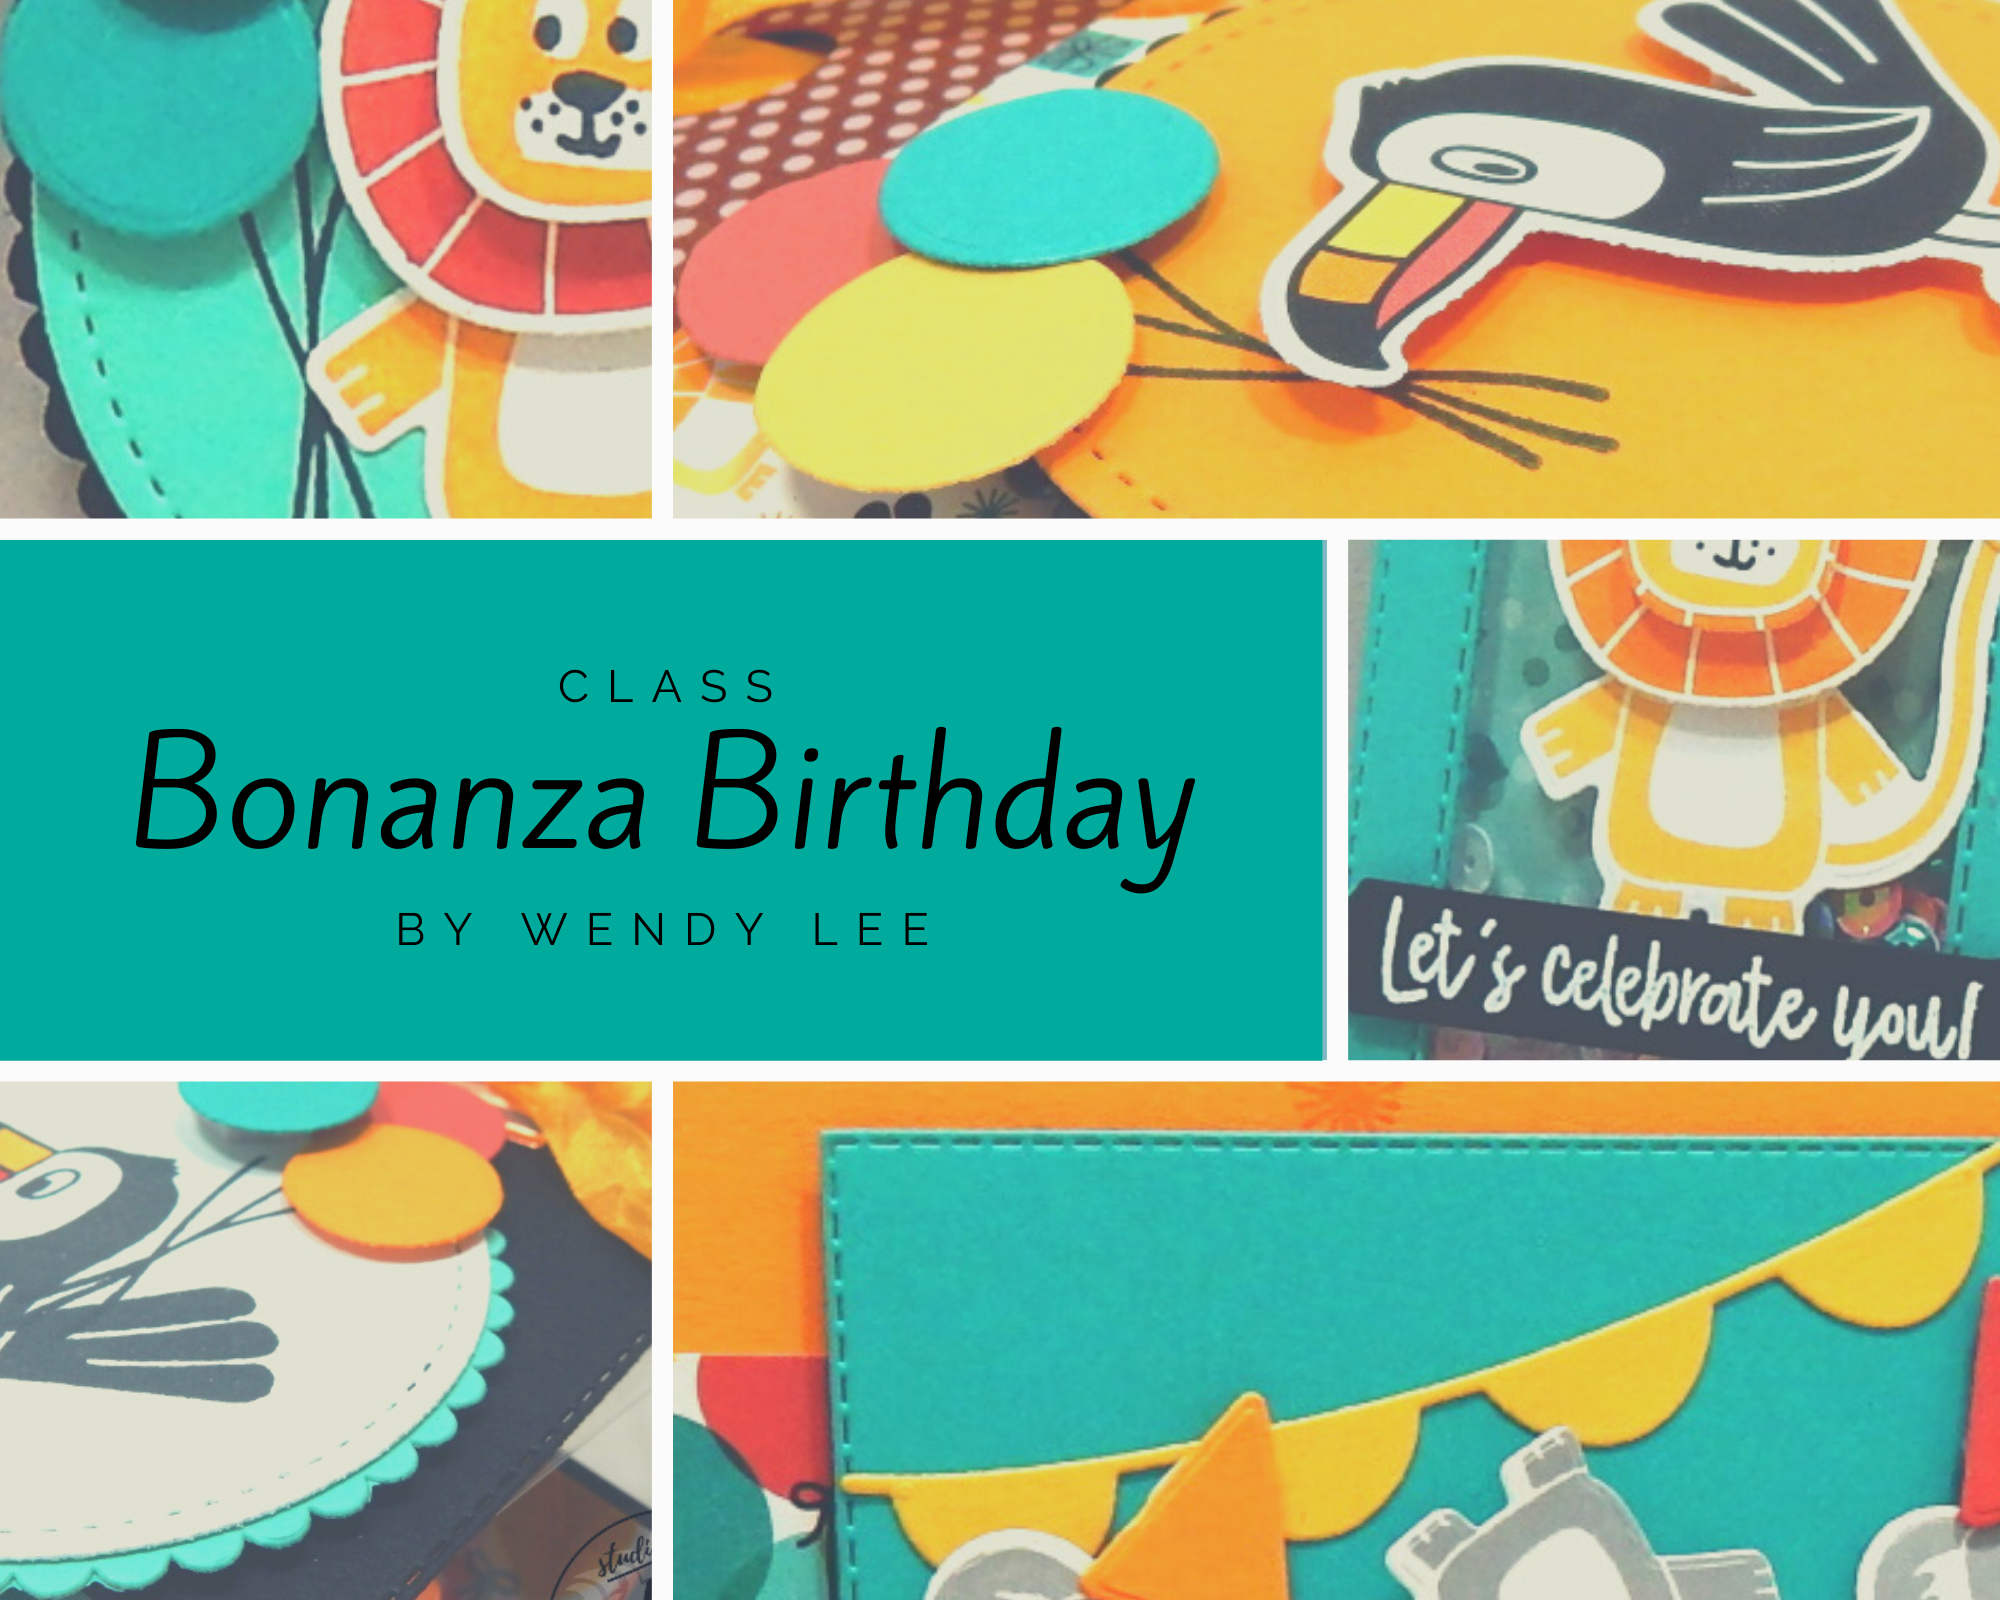 Bonanza Birthday Class by wendy lee, Stampin Up, #creativeleeyours, wendy lee, creatively yours, creative-lee yours, stamping, paper crafting, handmade, cards, class, friend, bonanza buddies stamp set, 3D, treat holders, gift card, cake topper, birthday, tutorial, class, DIY, papercrafts, tucan, koala, lion